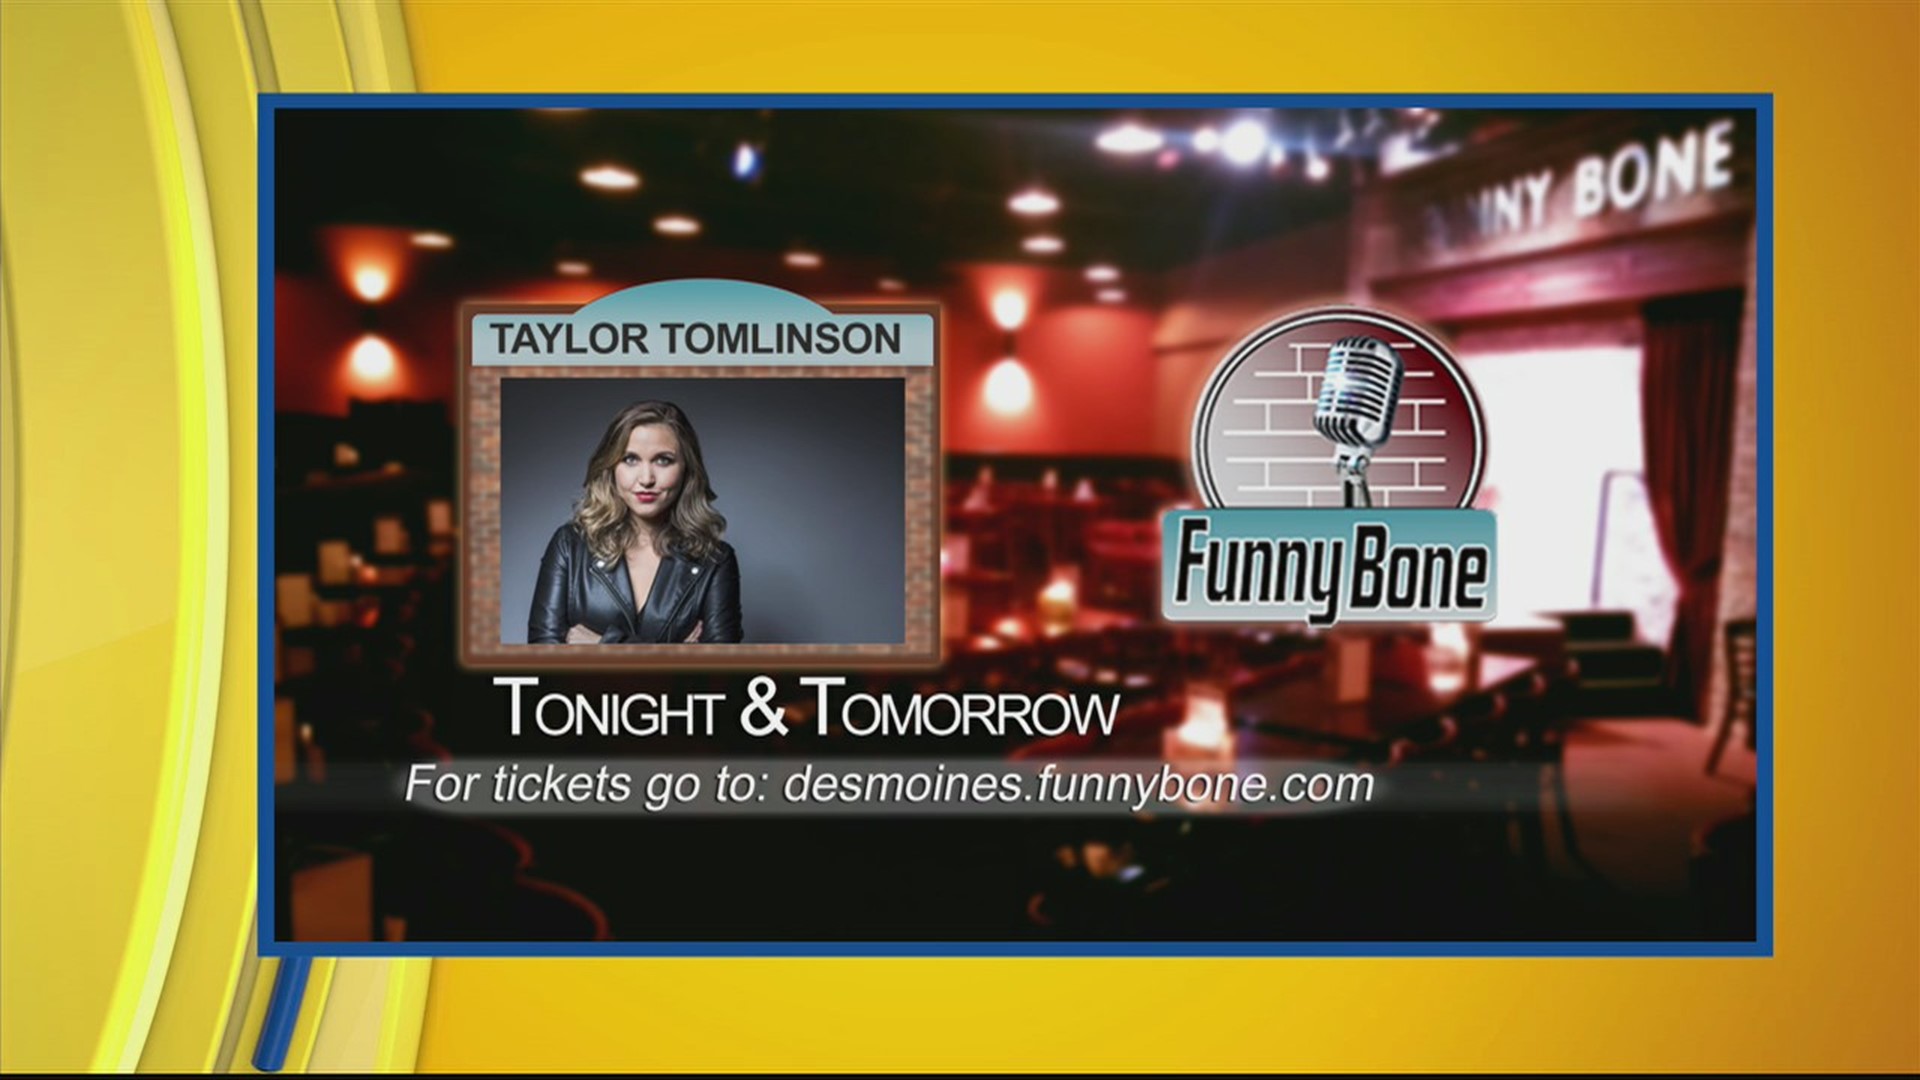 Taylor Tomlinson headlining at the Funny Bone this weekend